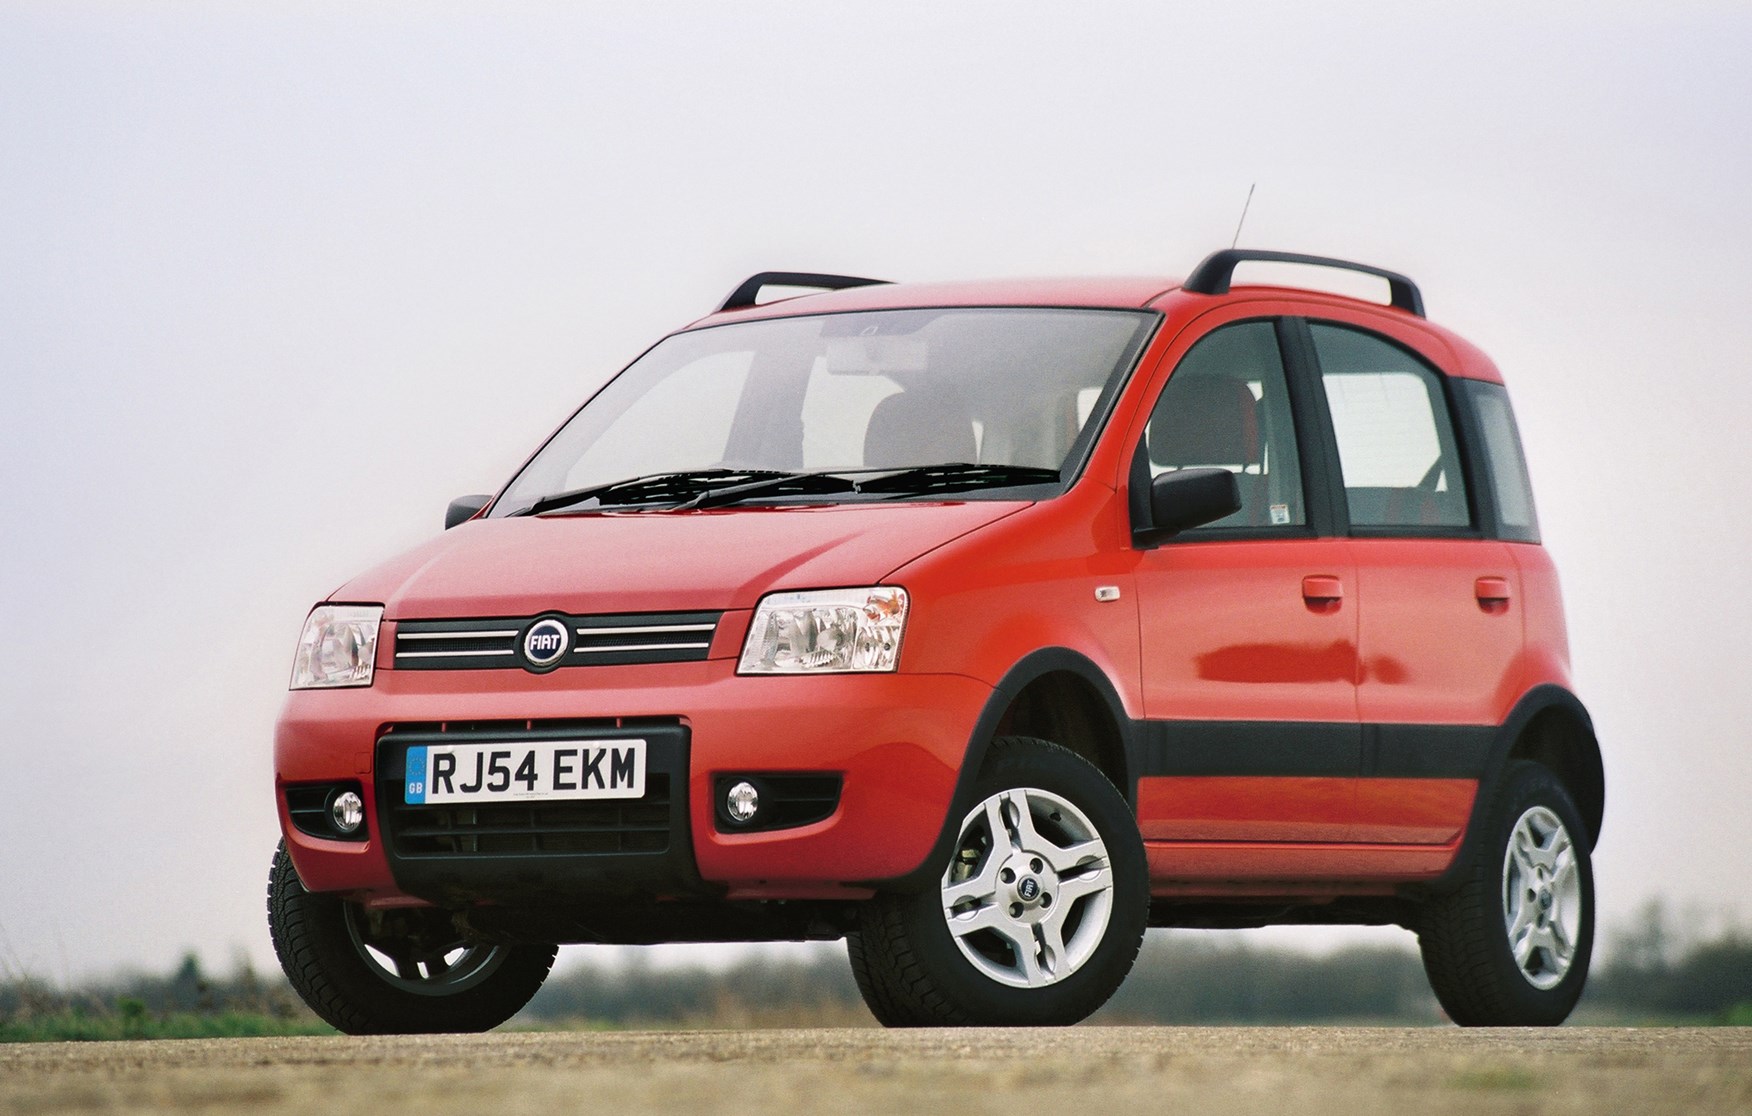 Used Fiat Panda 4x4 05 10 Review Parkers